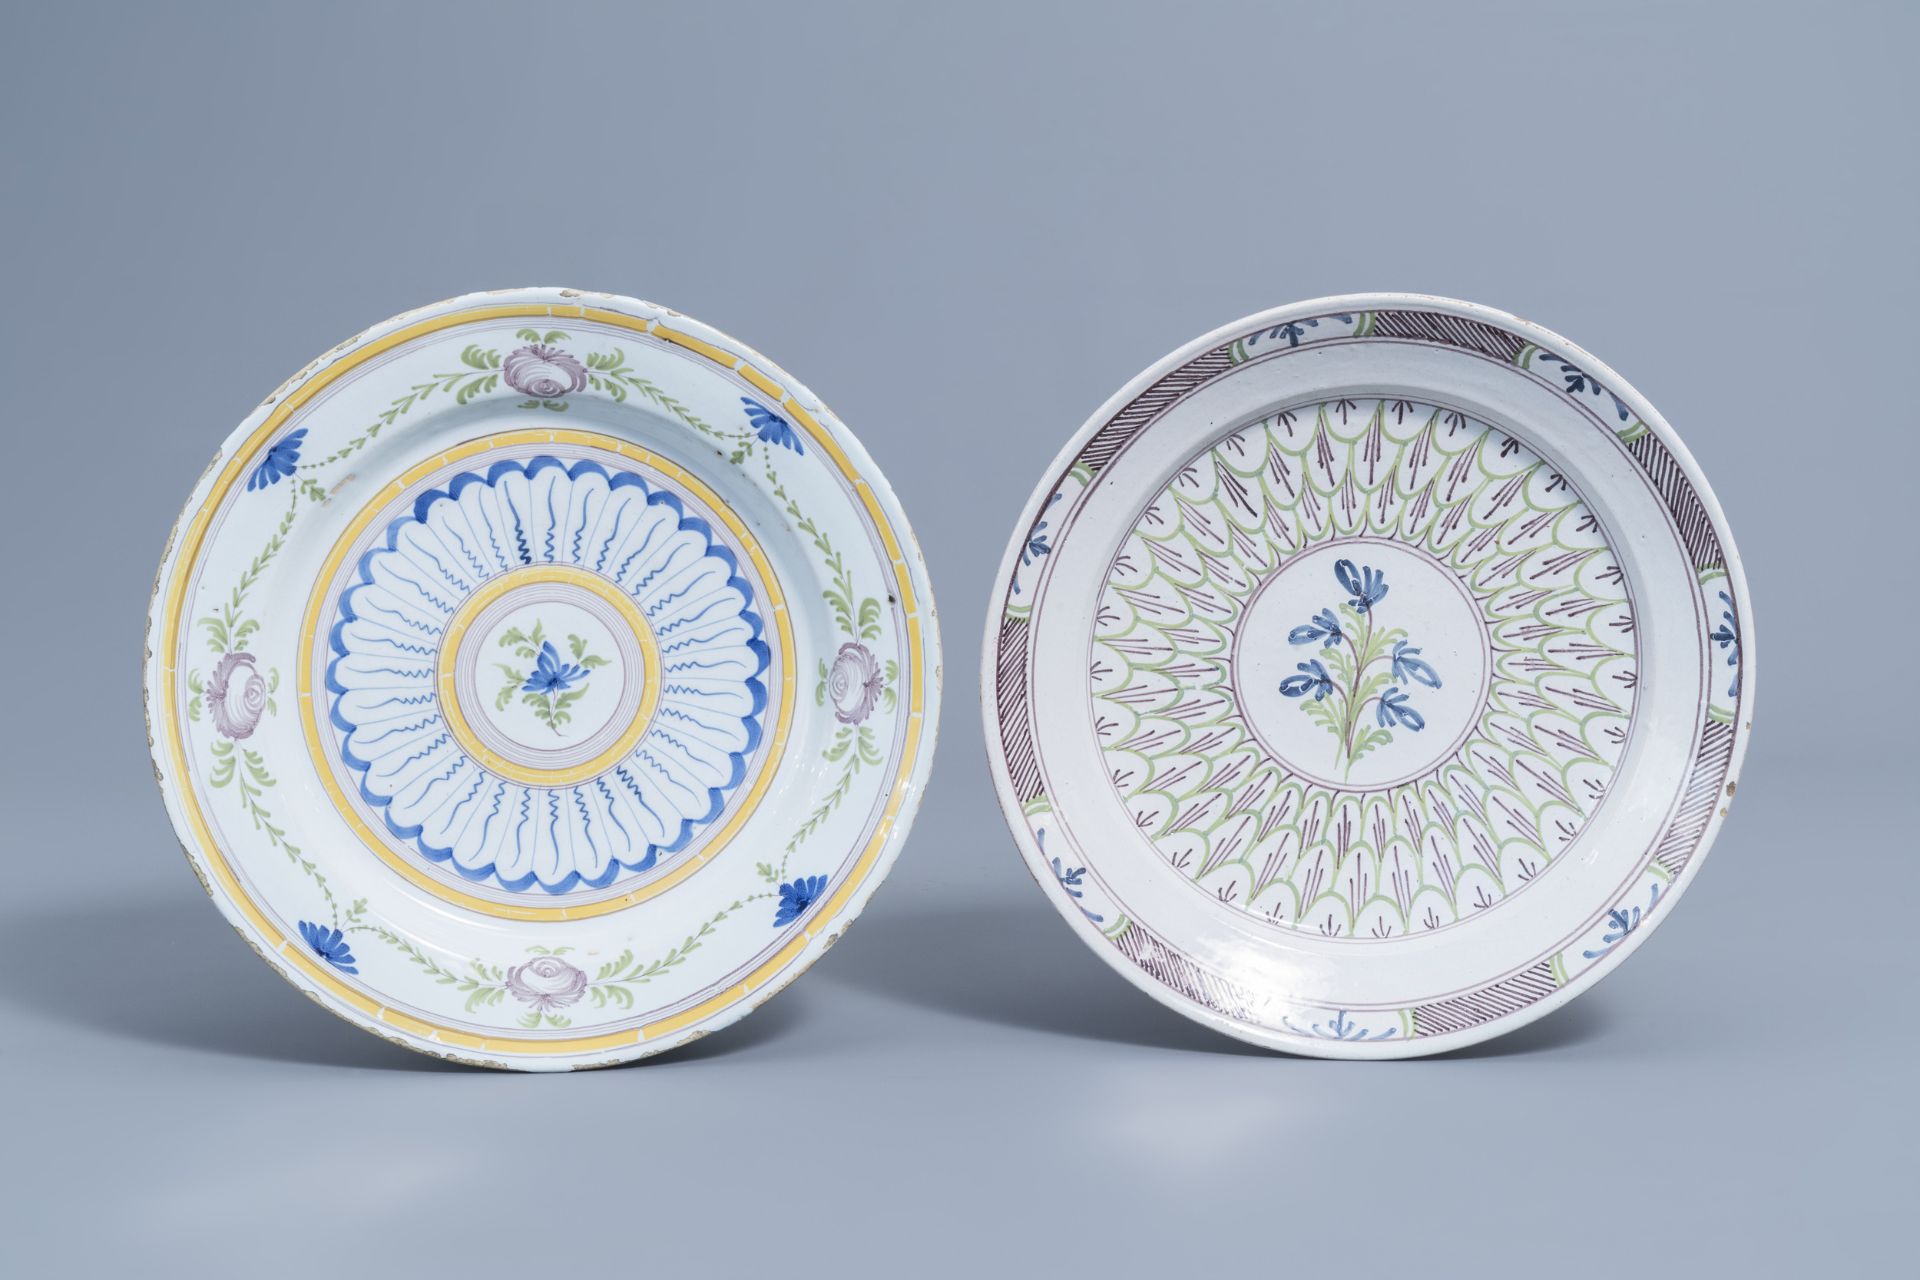 Five polychrome Brussels faience plates with floral design, 18th/19th C. - Image 3 of 12